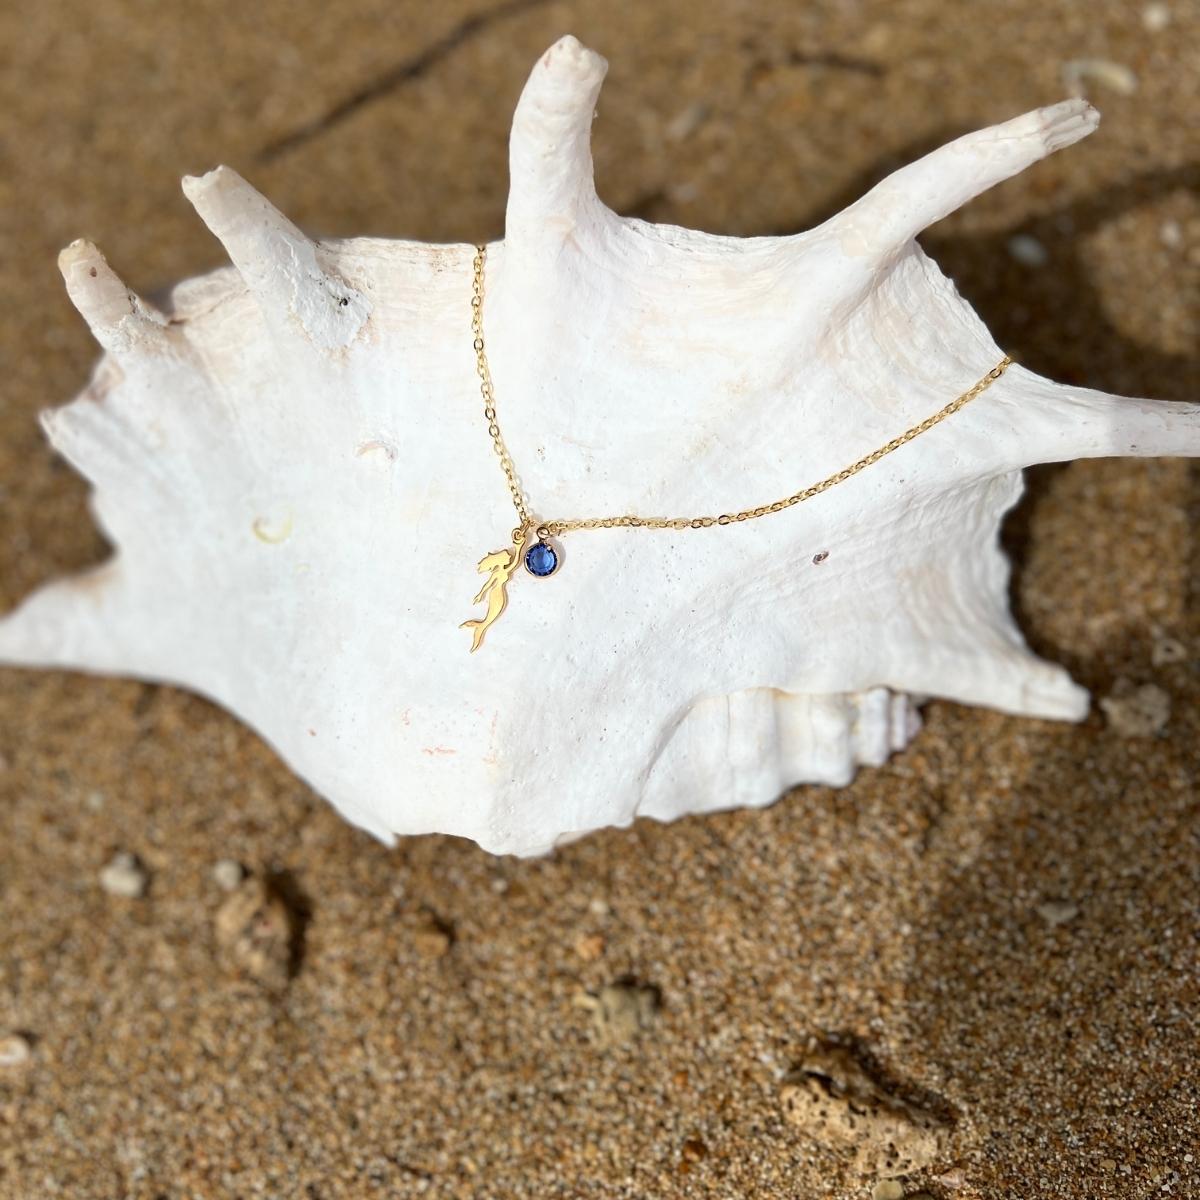 Miss Scuba Mermaid Necklace with Swarovski Crystal, Gold Filled over Sterling Silver This piece reflects Miss Scuba's sense of mystery and individuality, and beckons the free spirit in every self-made women.  Mermaids symbolize Love, Beauty, Mystery, Untamed Spirit and Femininity.